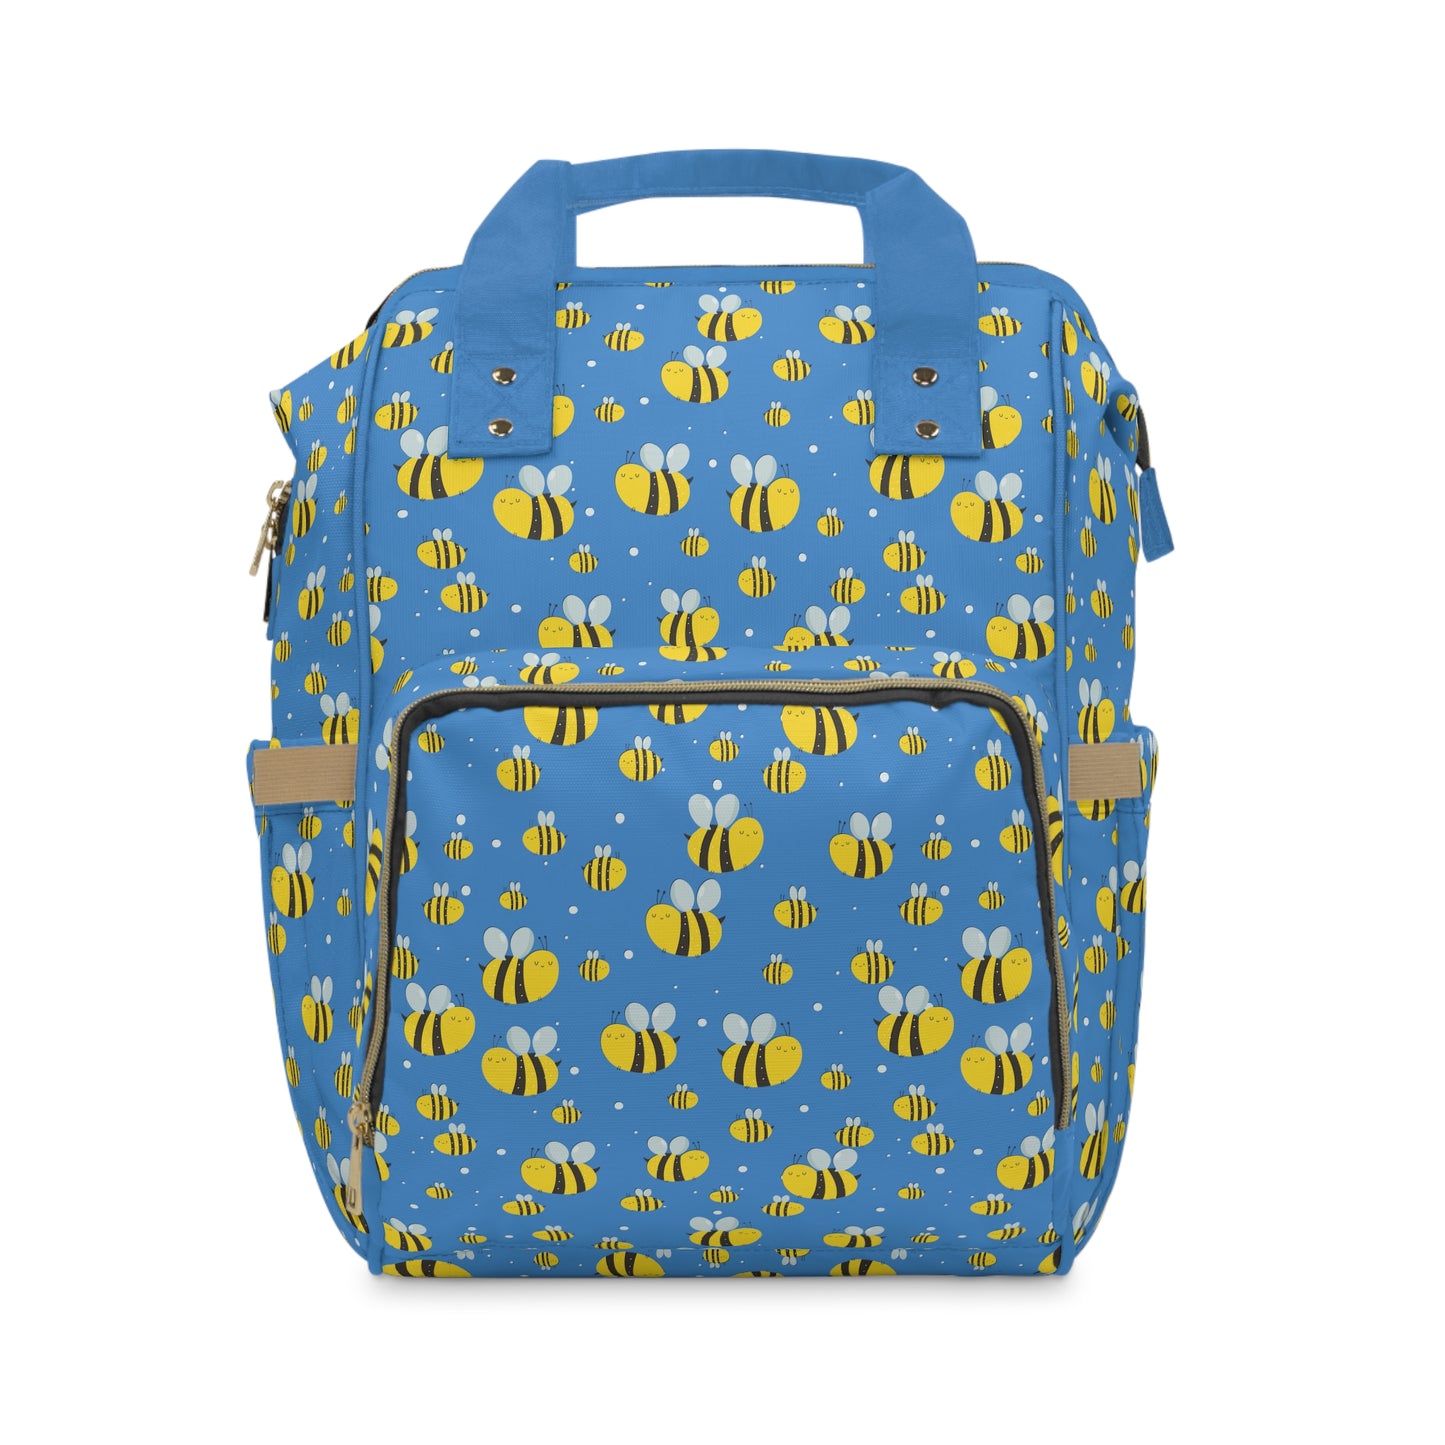 Lots of Bees - Blue #139aff  - large print - Multifunctional Diaper Backpack